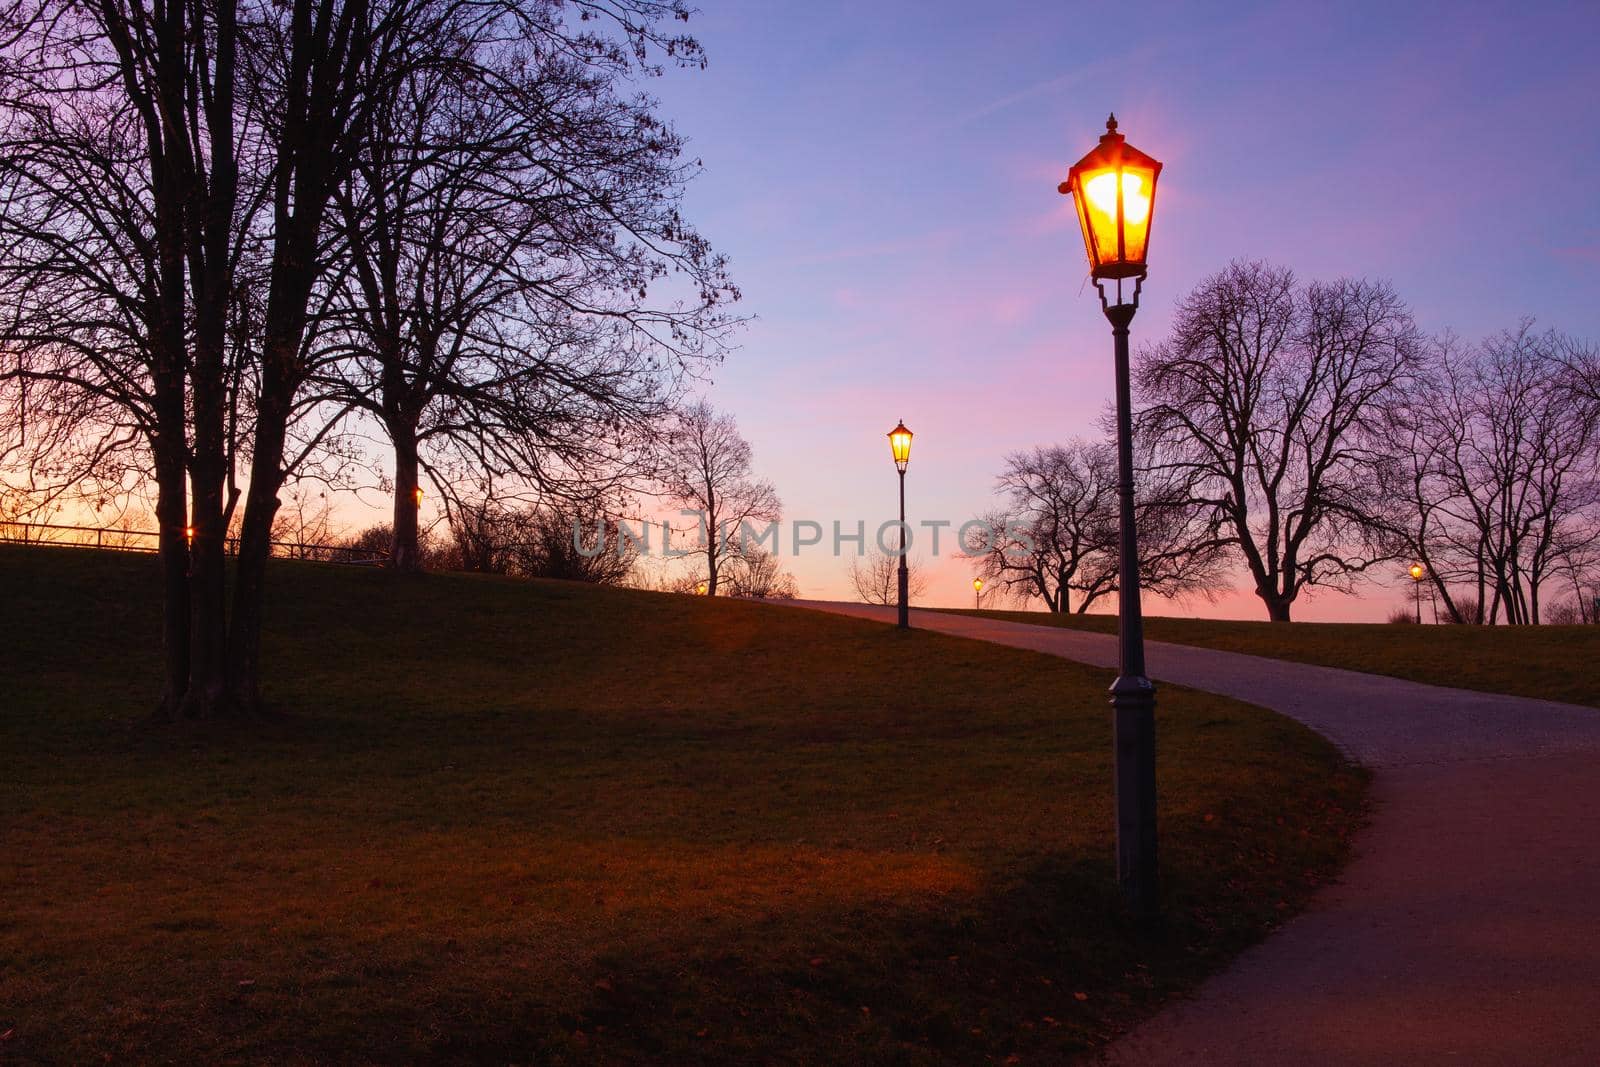 Very early morning in the Vysehrad park., Prague, Czech Republic. by CaptureLight